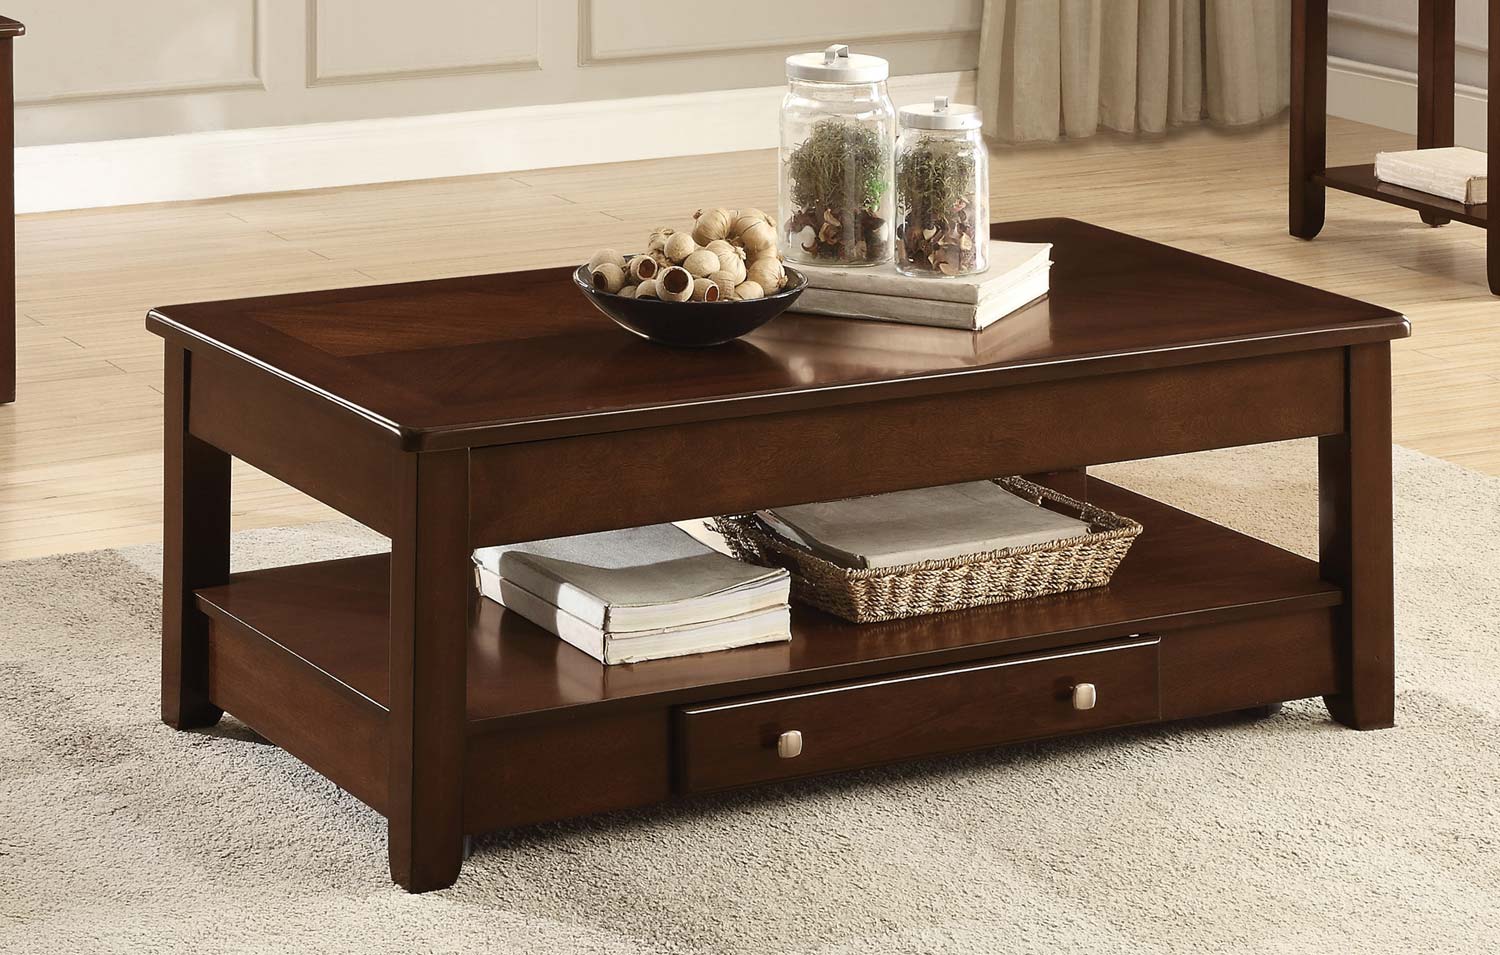 Homelegance Ballwin Cocktail Table with Lift Top and Functional Drawer on Casters - Deep Cherry